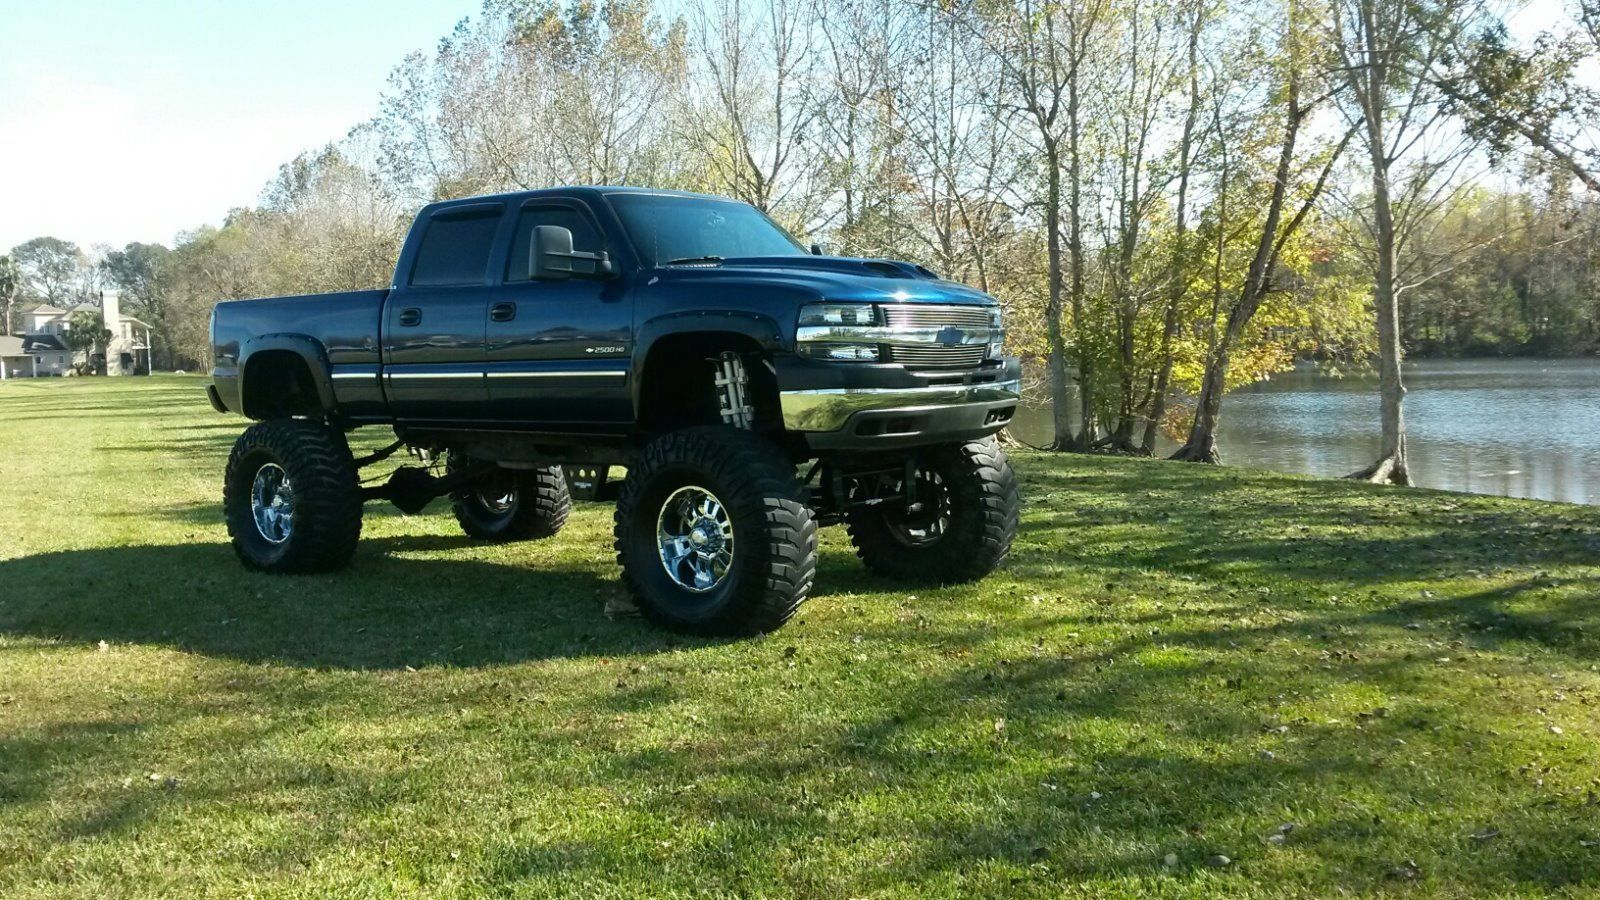 2002 Lifted Chevy Silverado HD2500 Monster truck for sale